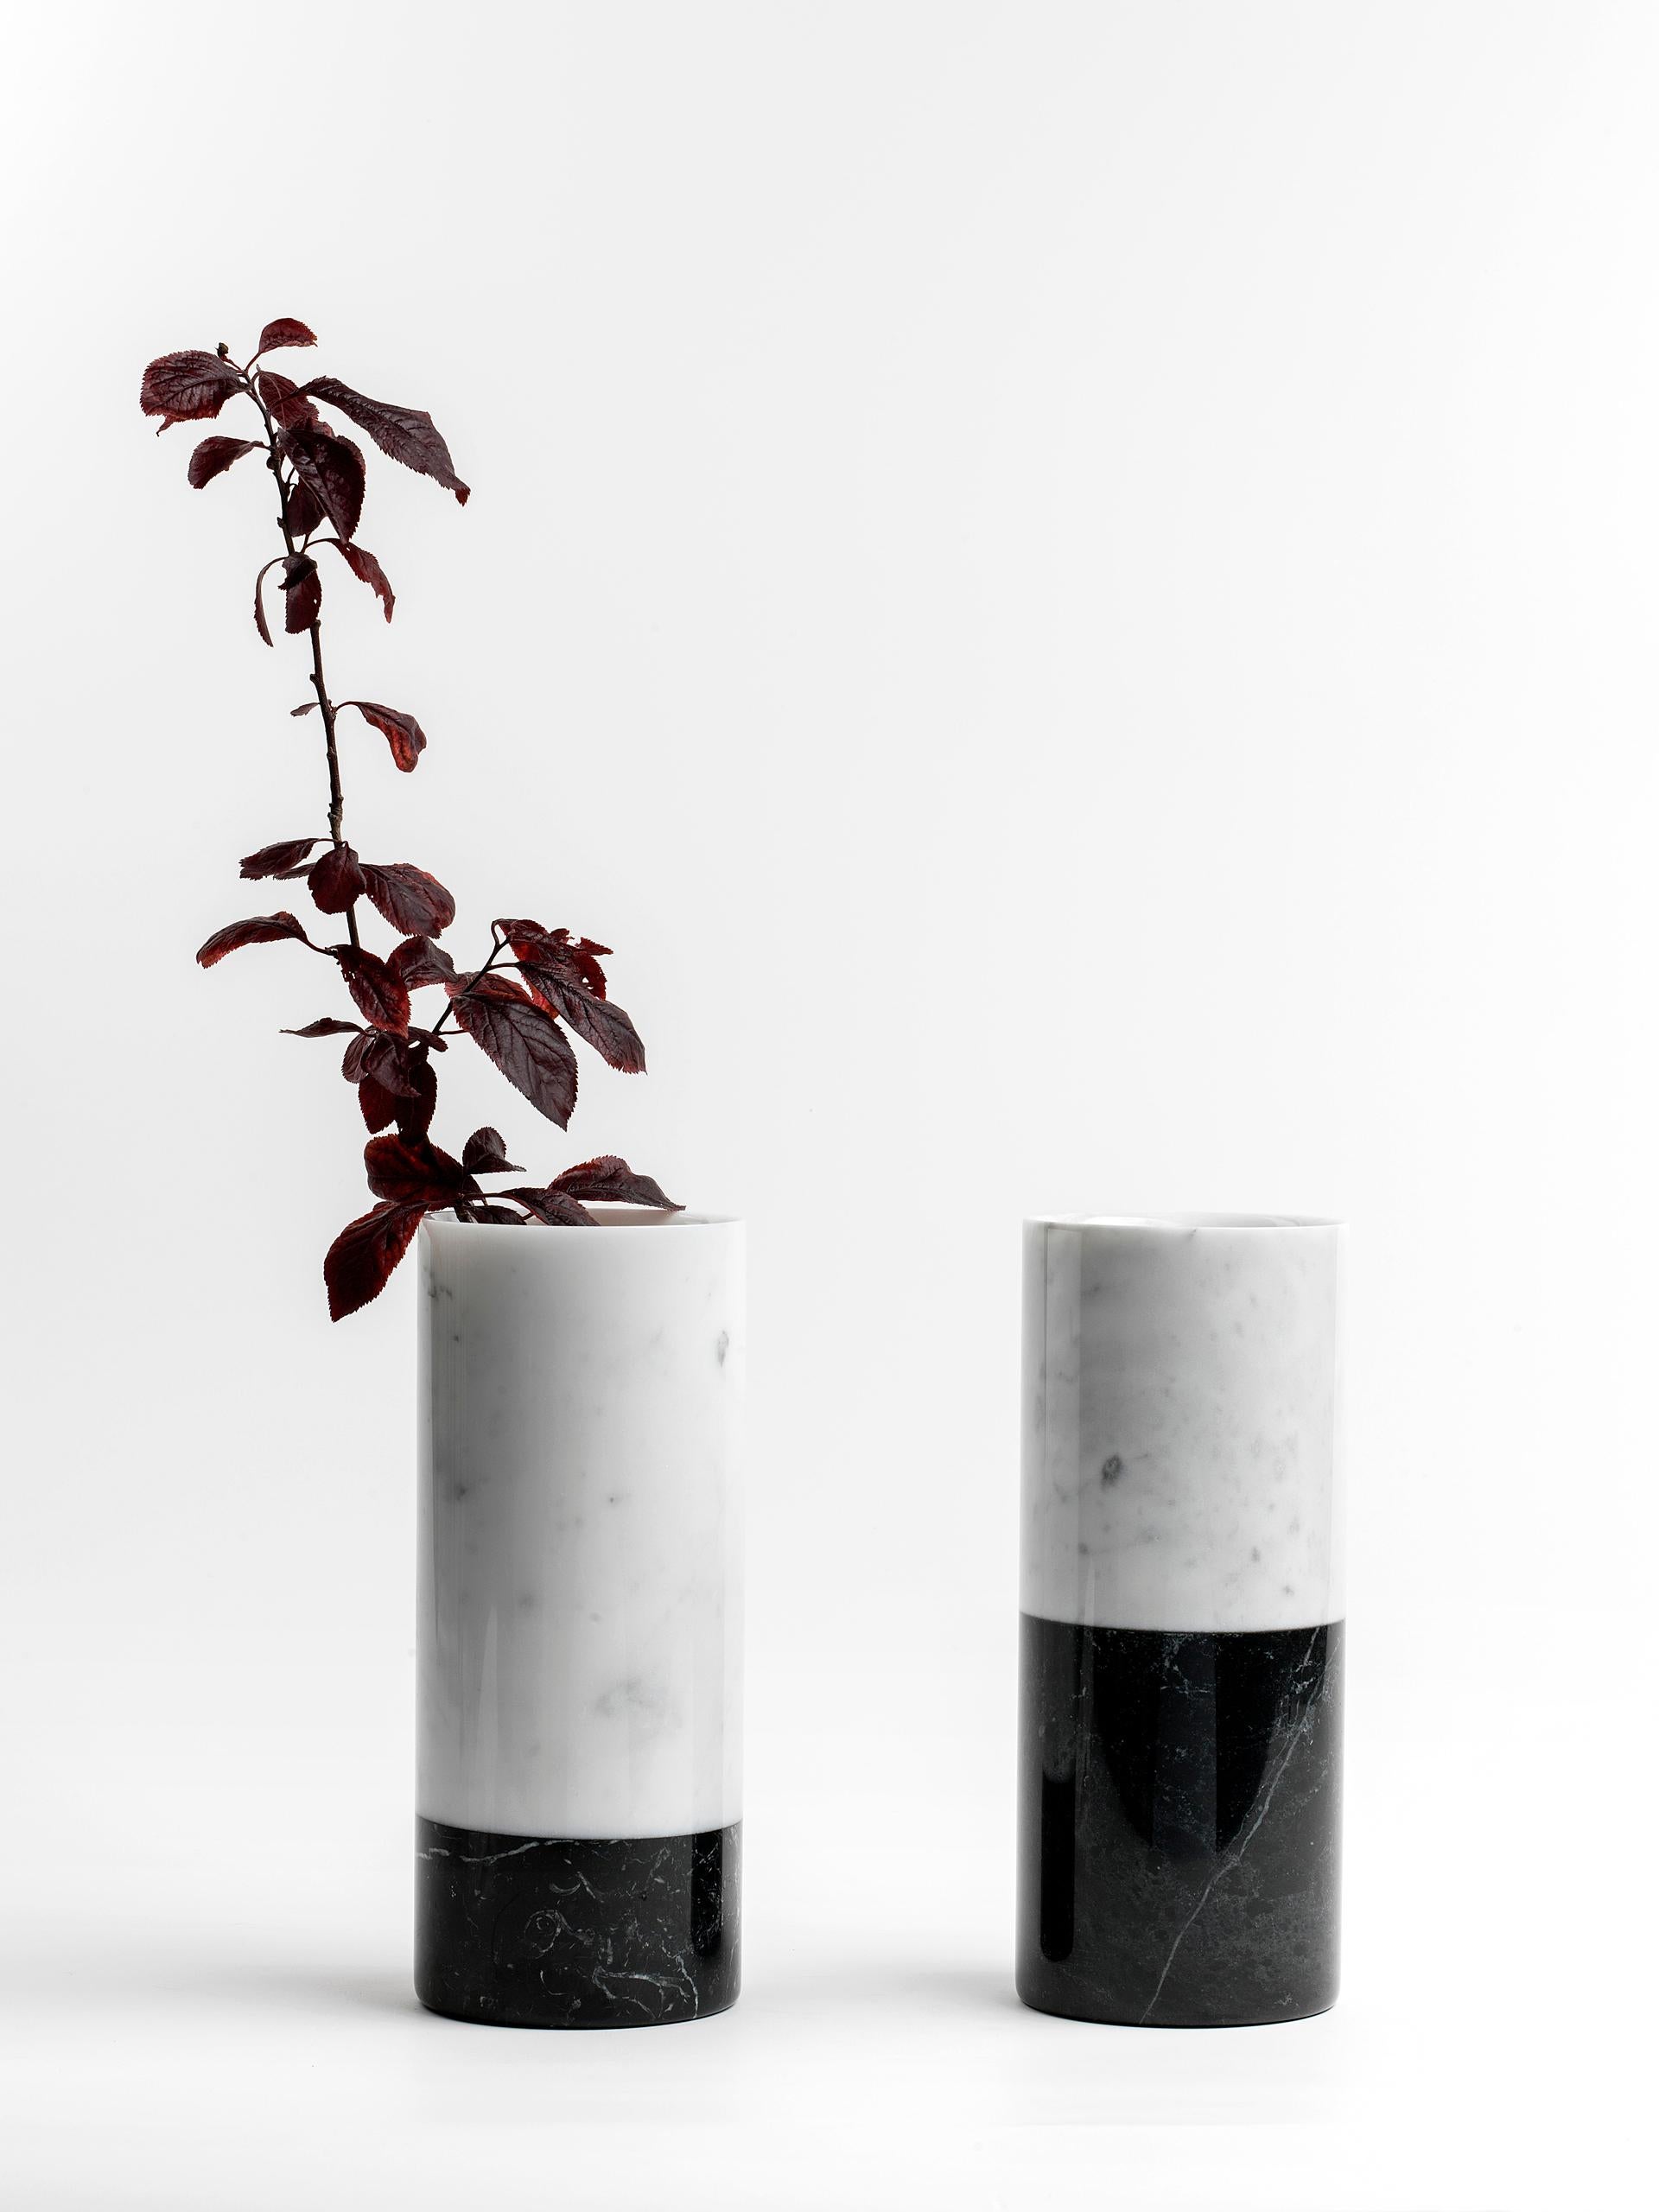 Cylindrical white Carrara and black Marquina marble vase with lower bottom black band, made in Italy, Carrara.
Each piece is in a way unique (since each marble block is different in veins and shades) and handcrafted in Italy. Slight variations in